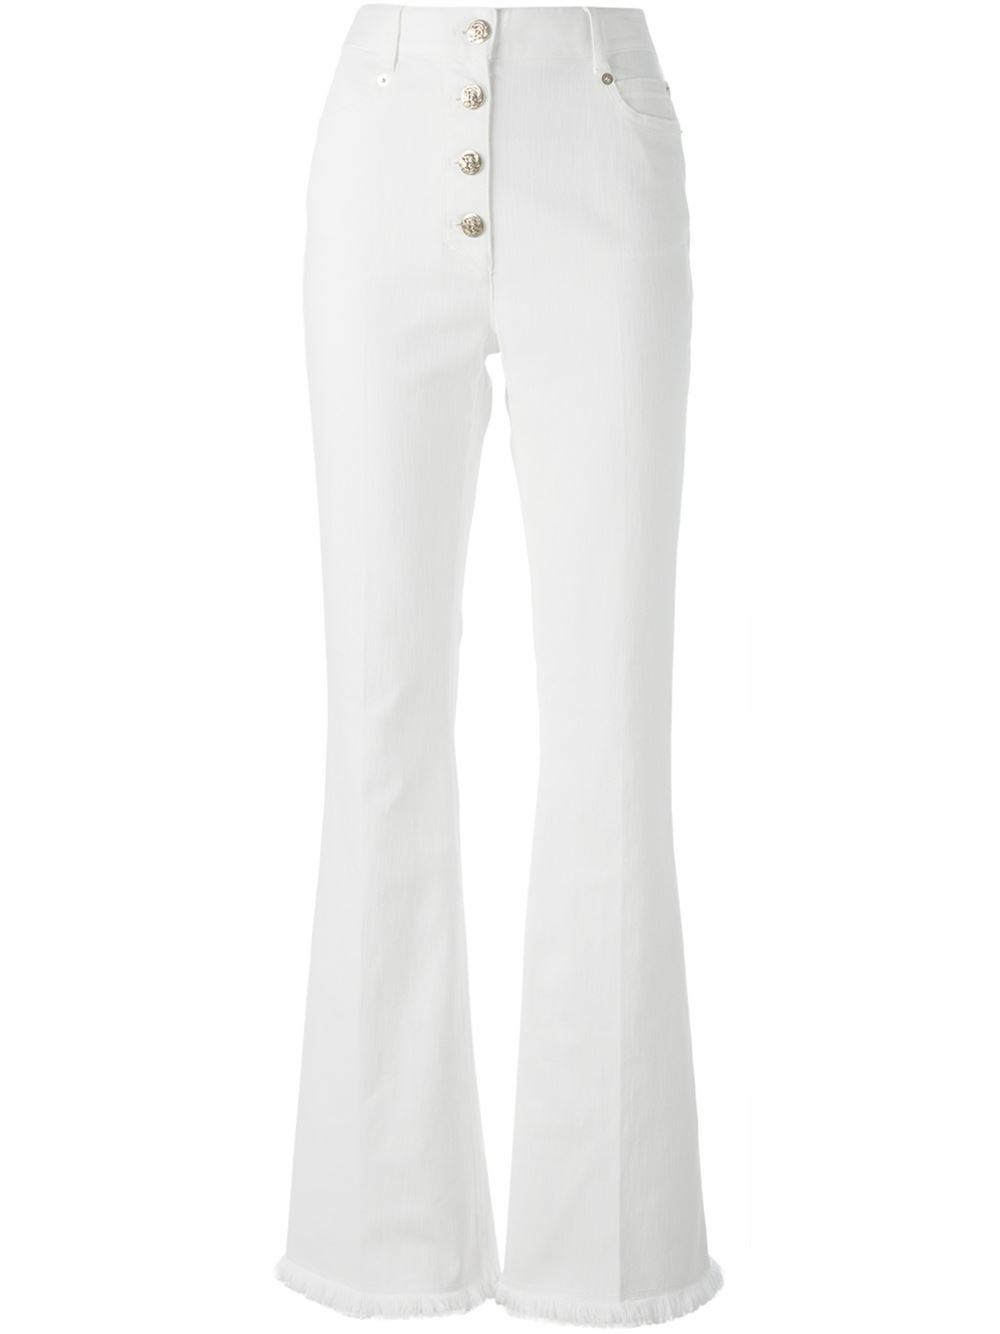 Sonia Rykiel High-Waisted Flared Jeans in White | Lyst